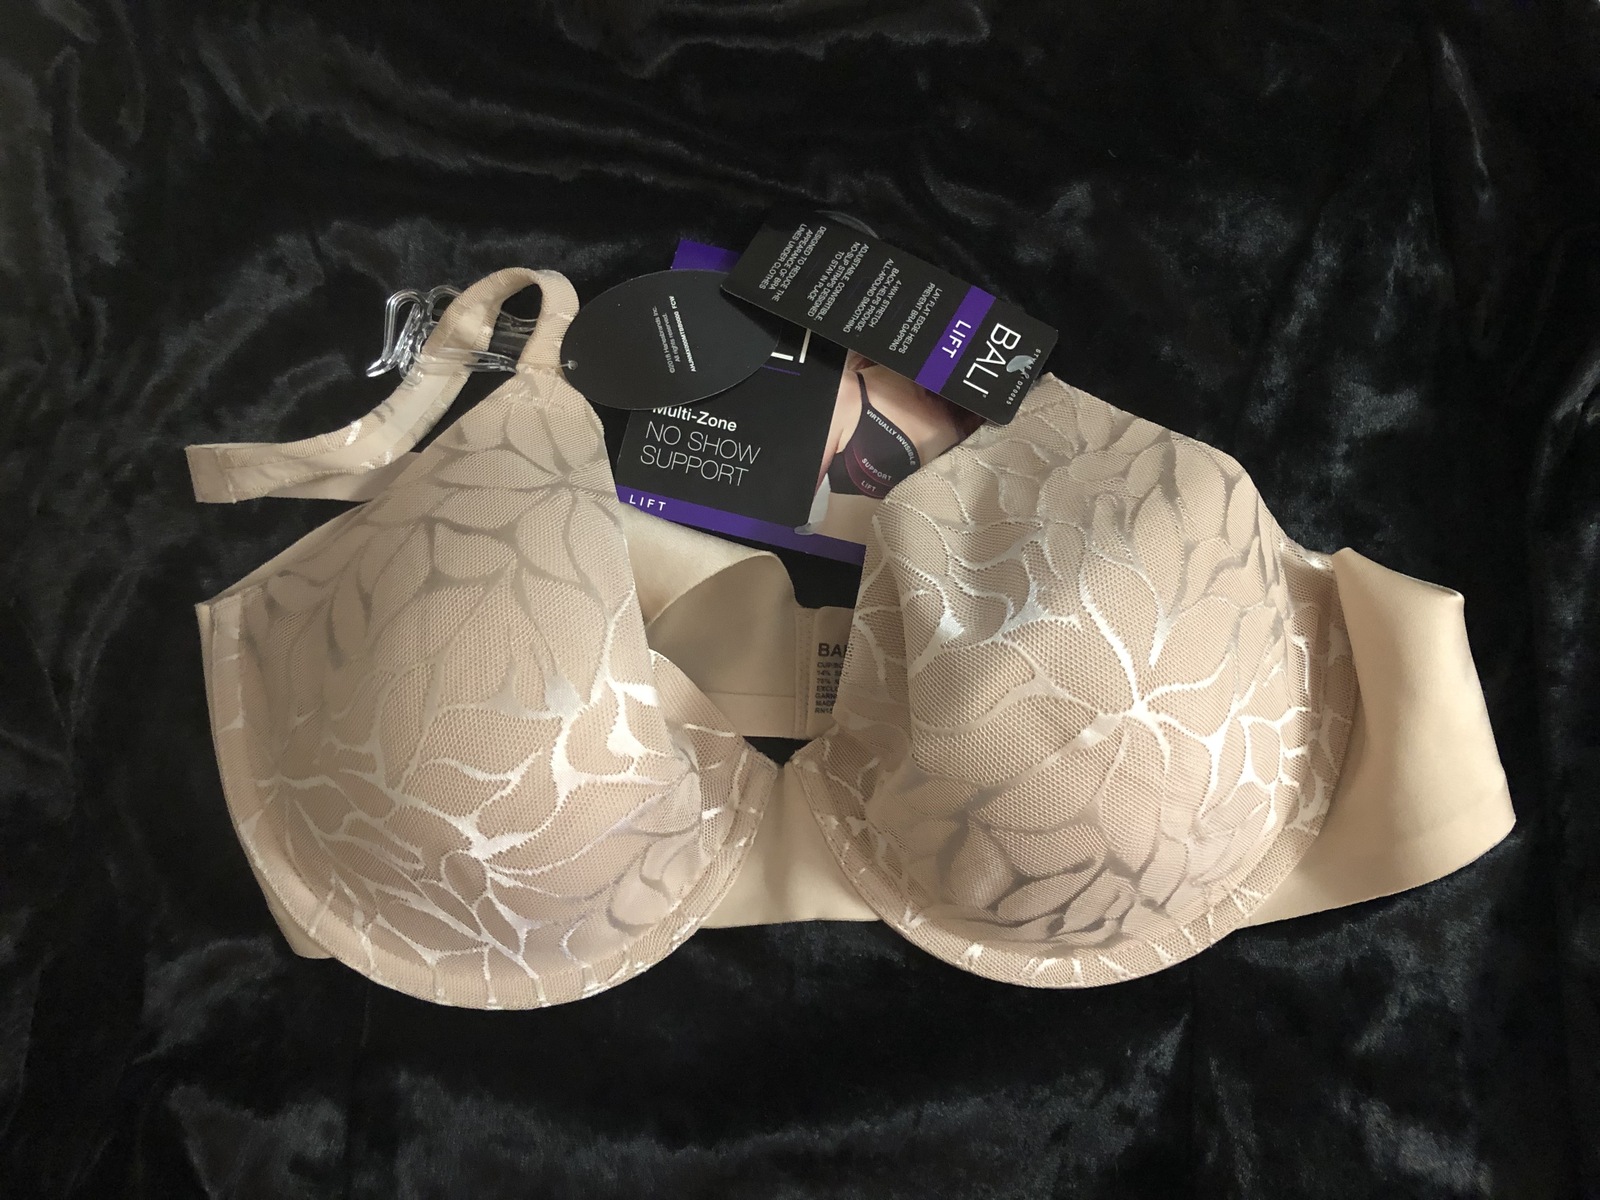 Bali Beauty Lift No Show Support Tailored Underwire Bra Nude DF0085 Sz 38ddd  for sale online